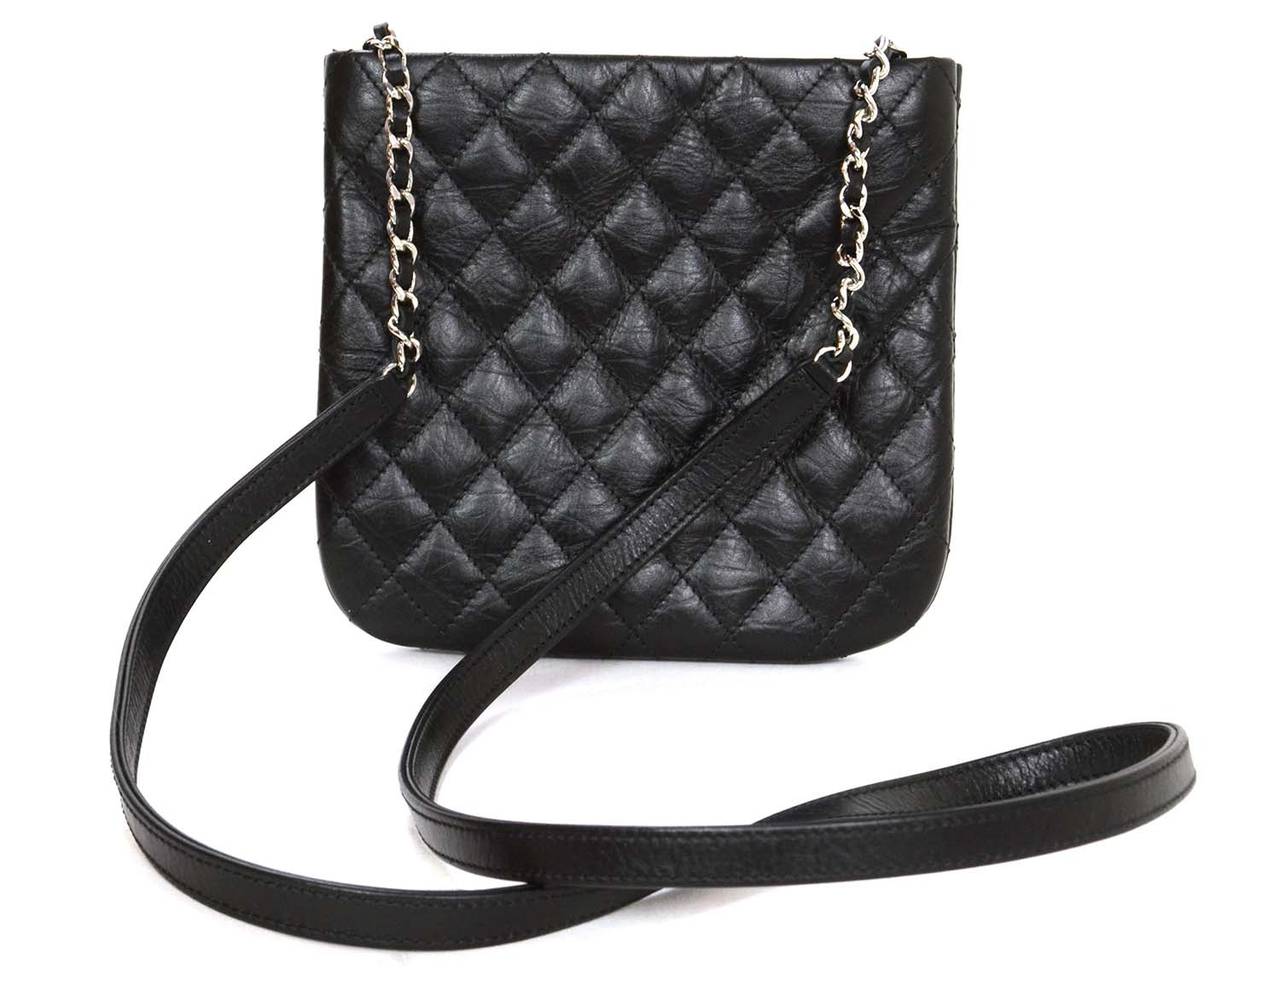 Chanel Black Quilted Leather Crossbody Bag SHW
Features CC logo at front center and silver chain link and leather crossbody strap

    Made in: Romania
    Year of Production: 2012-2013
    Color: Black and silvertone
    Hardware: